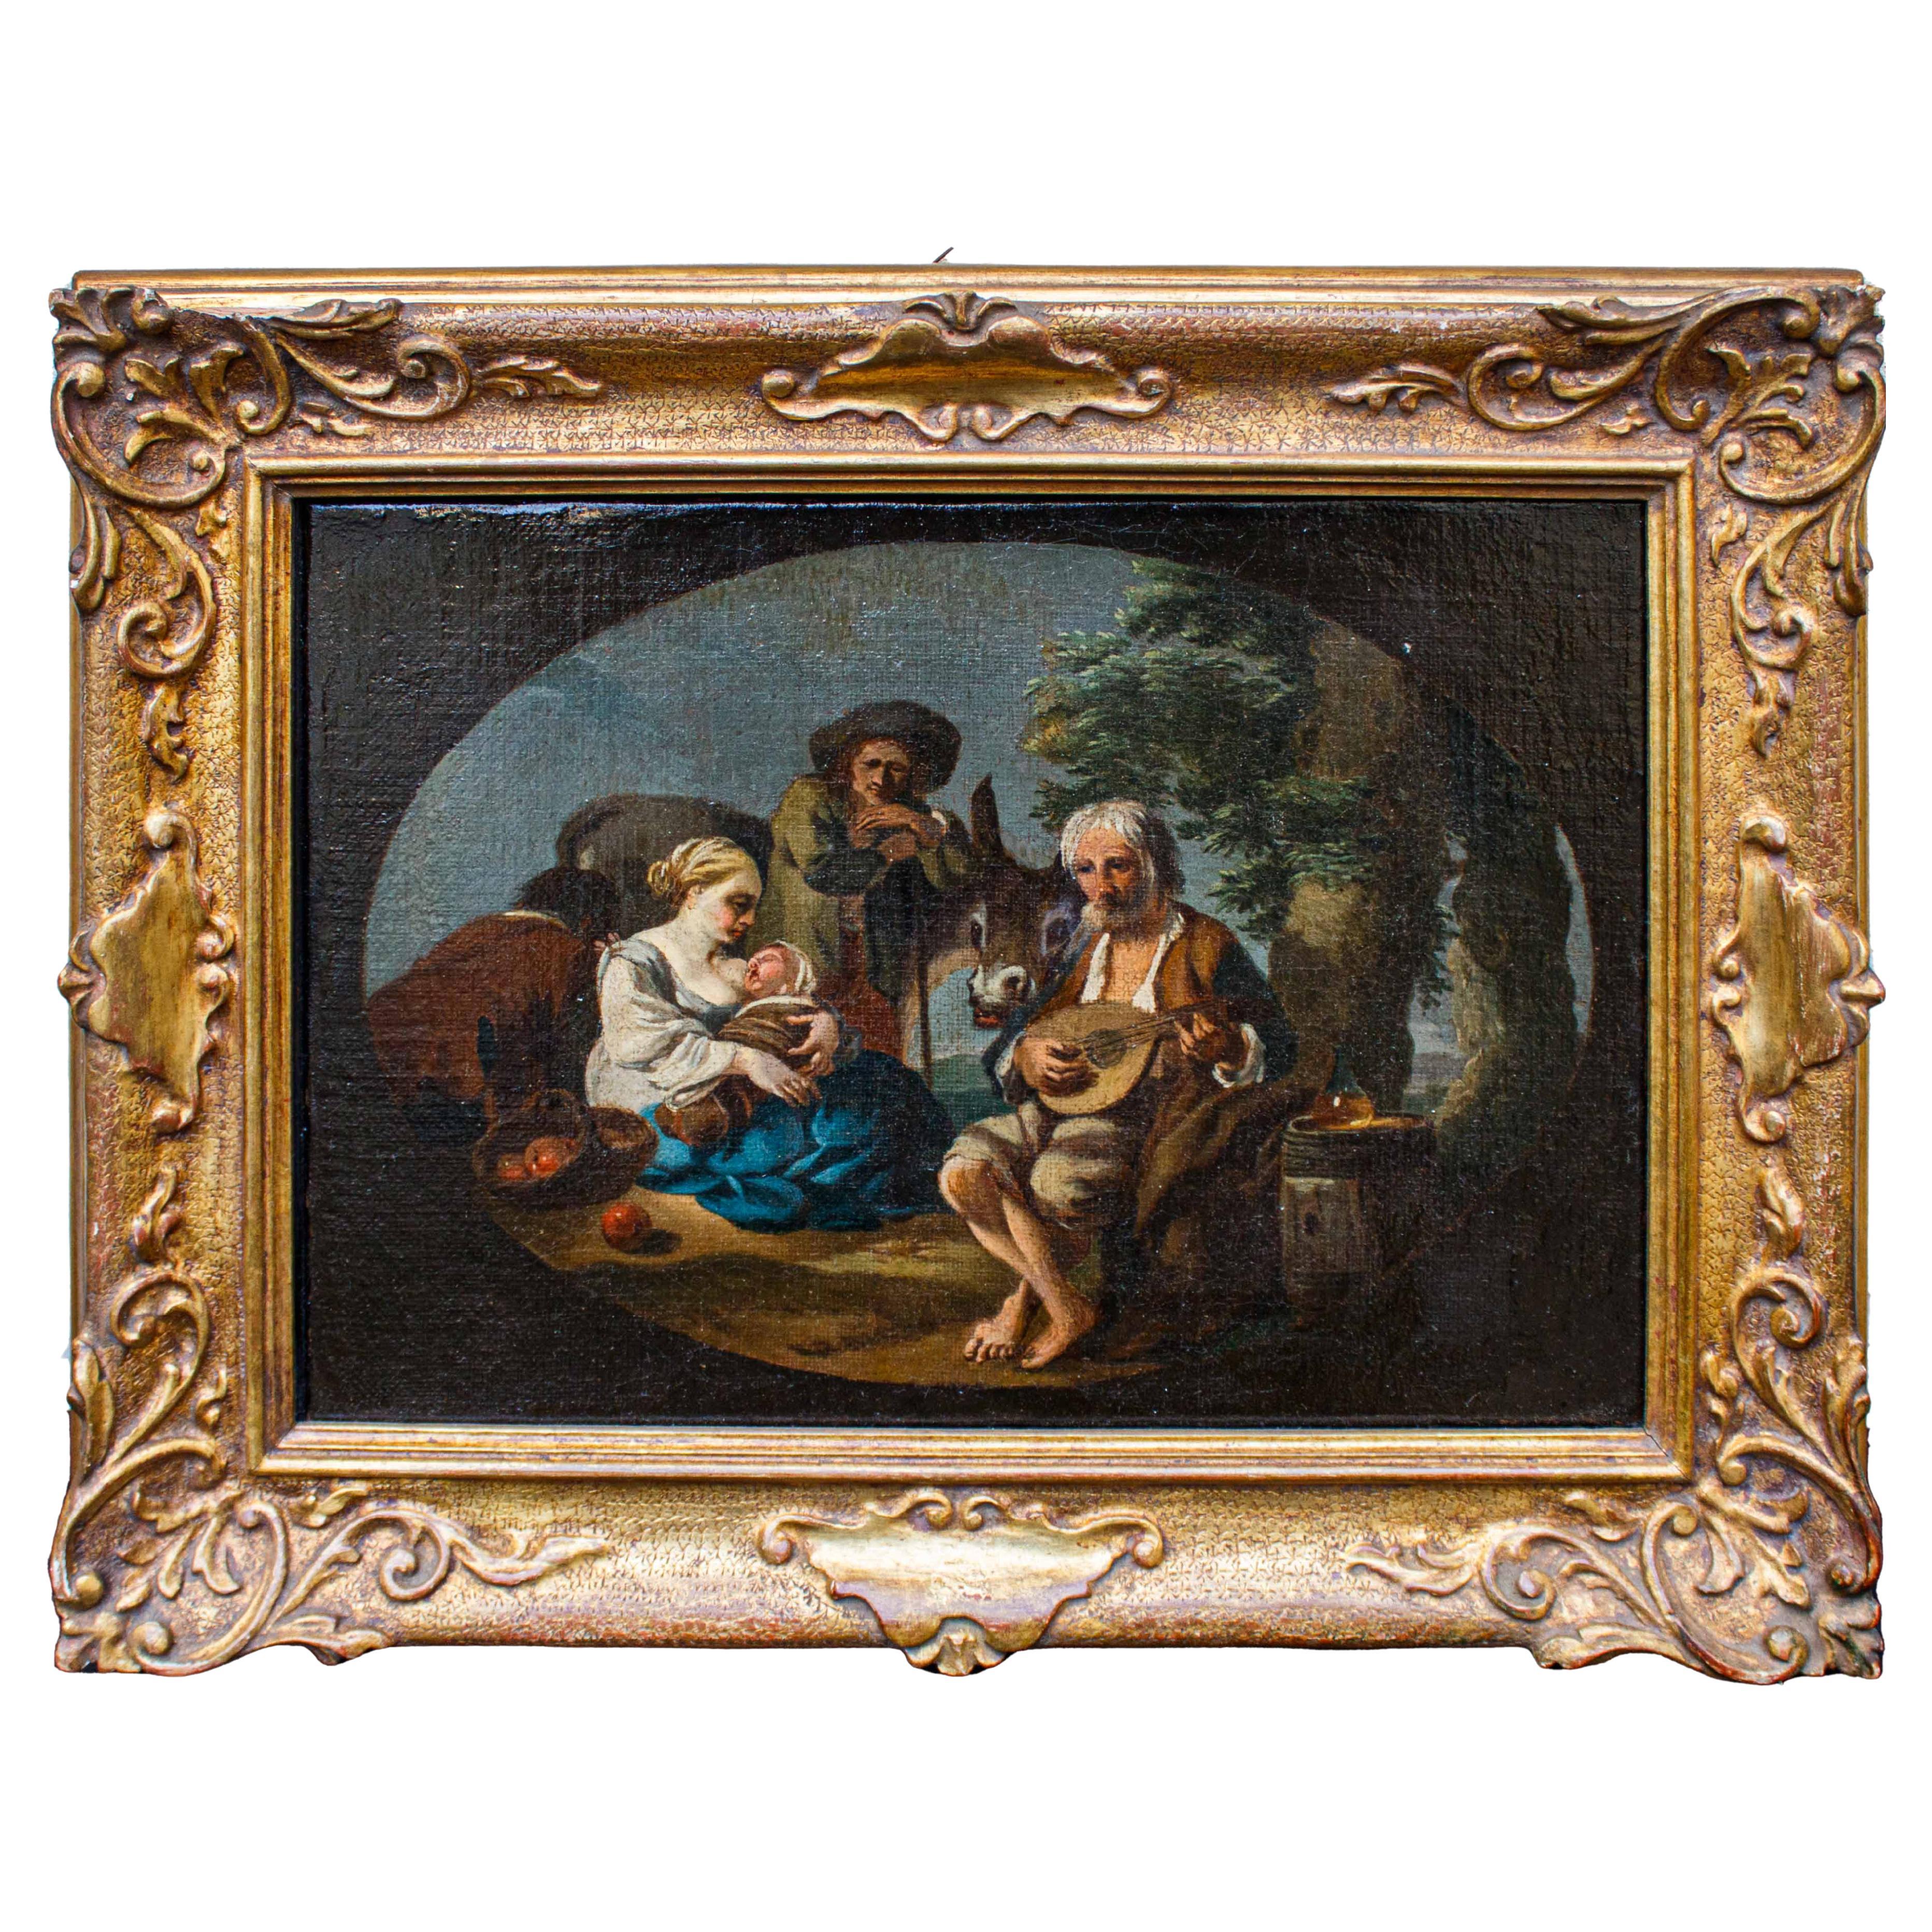 18th Century Genre Scene Painting Oil on Canvas Attributed to Paolo Monaldi